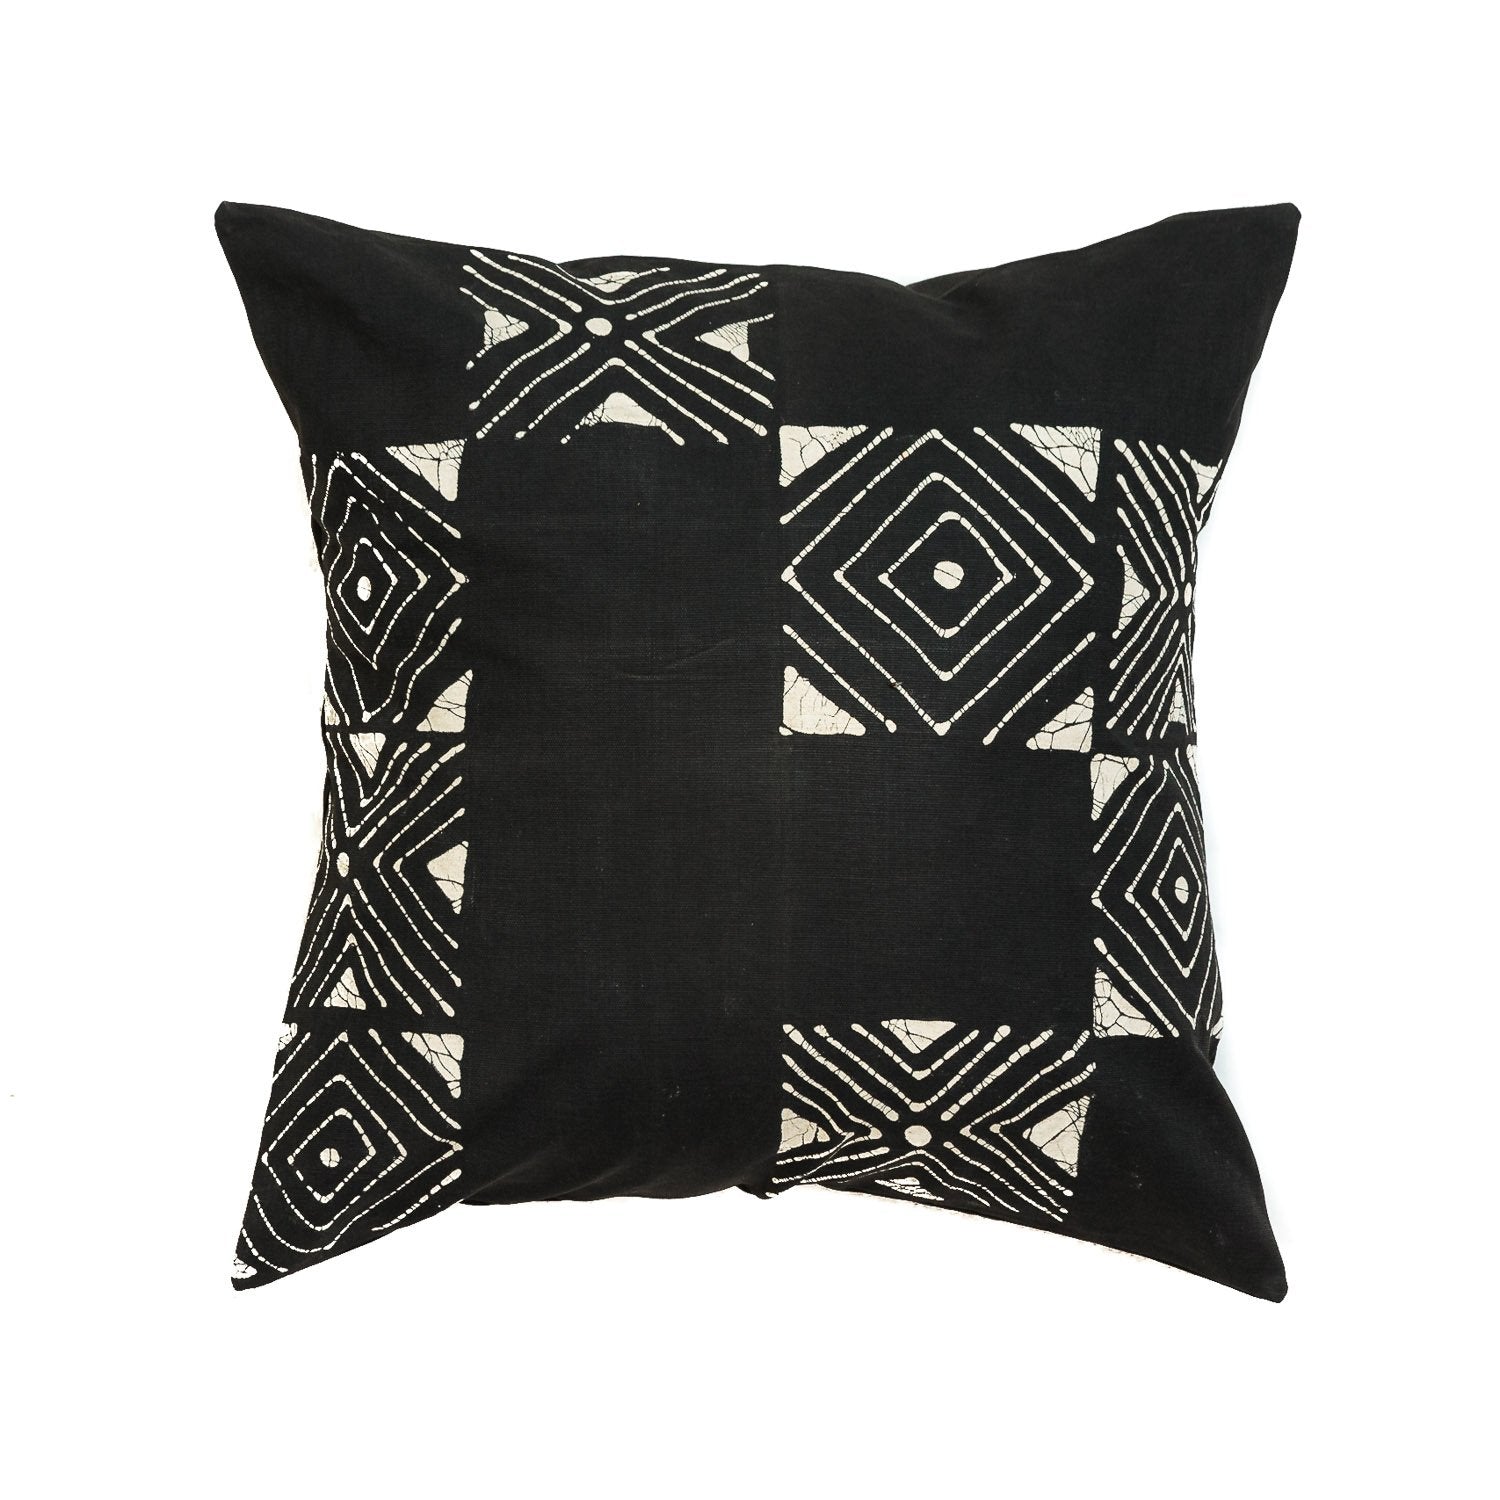 Matika Black Grid Cushion Cover - Handmade by TRIBAL TEXTILES - Handcrafted Home Decor Interiors - African Made